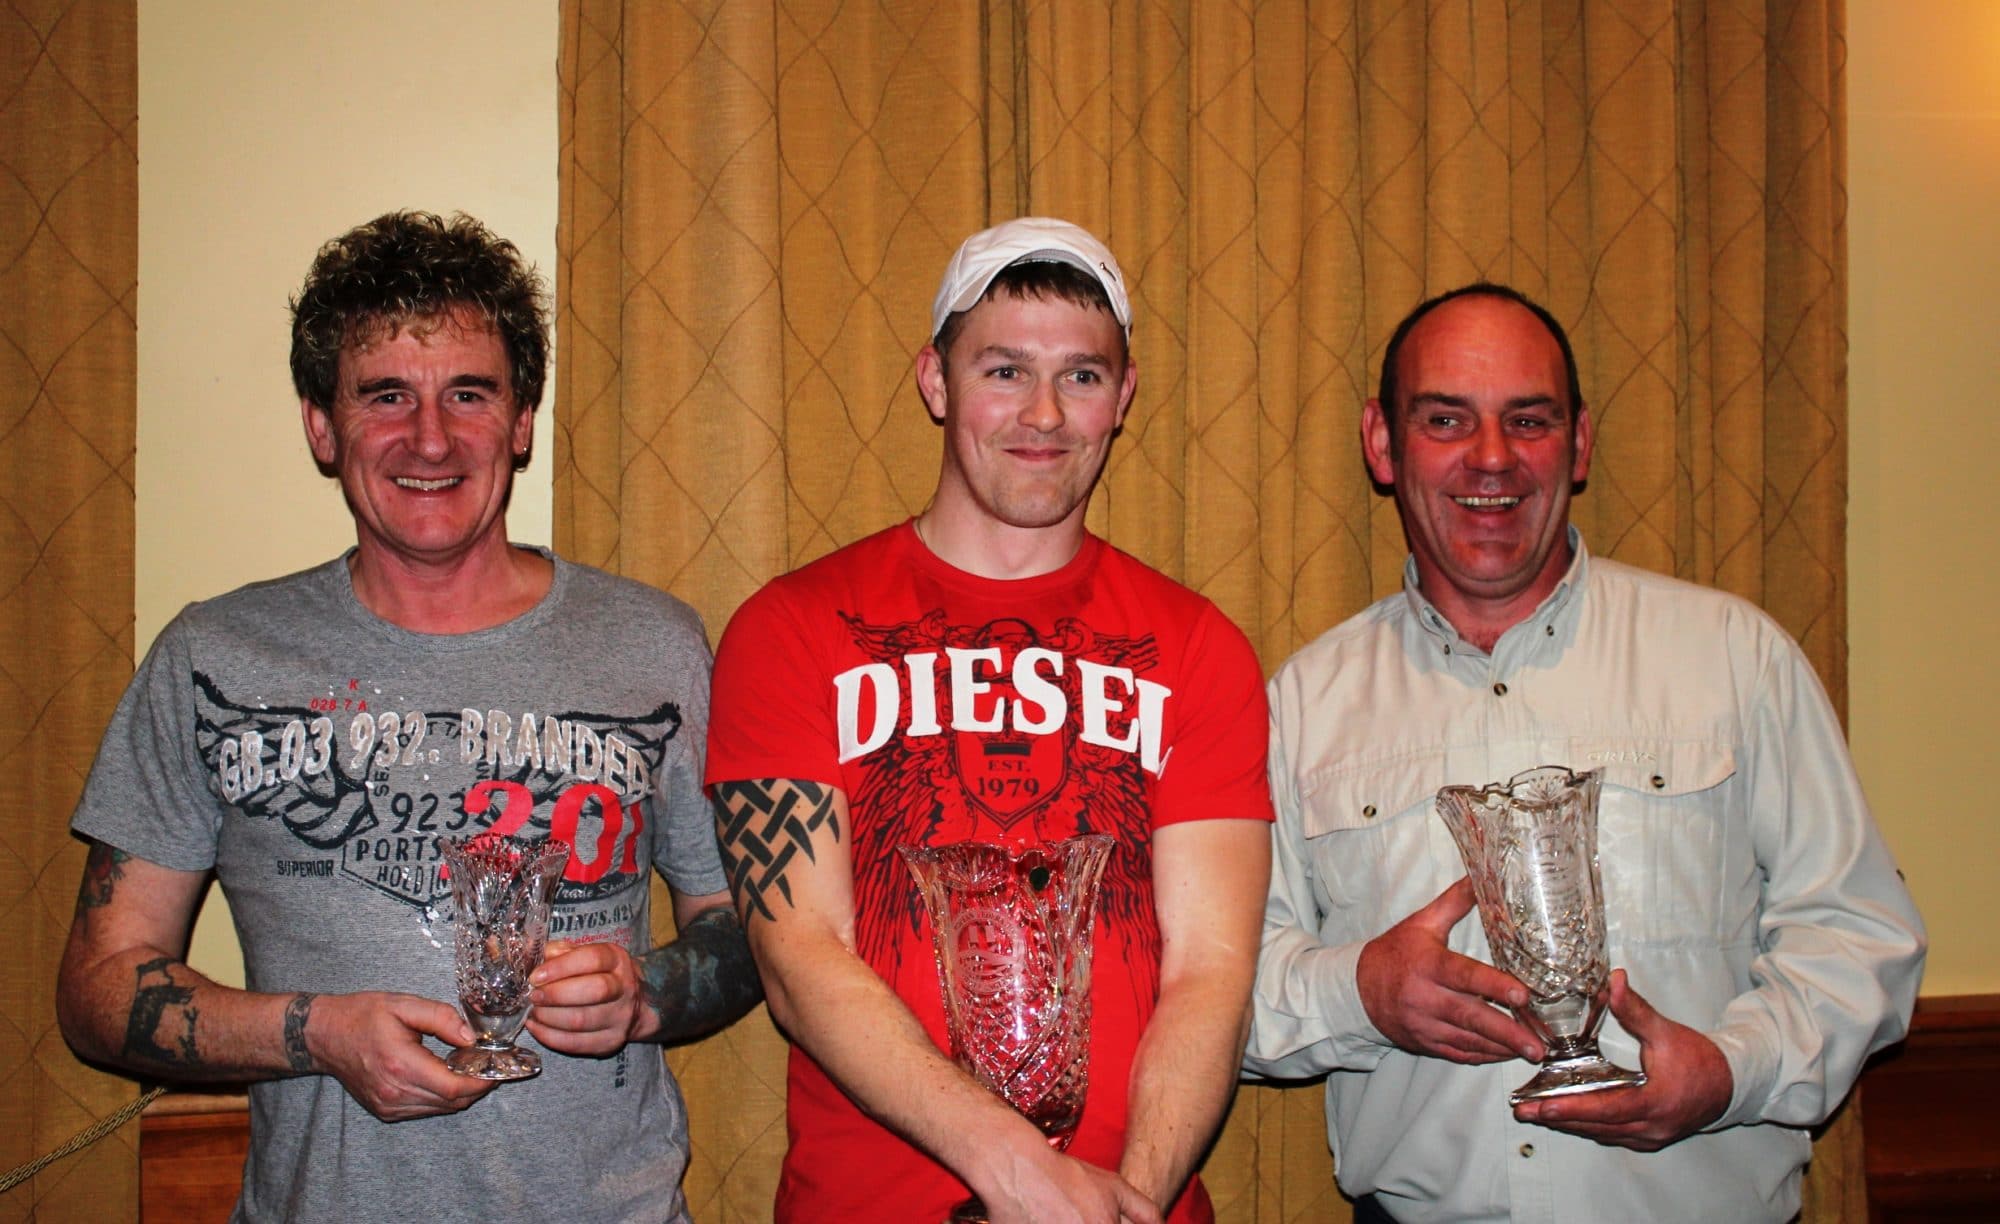 Winner of the Individual Title, Dave Roe (centre) pictured with Joe Byrne (R) who finished in Second Place and Ian Knight (L) who finished in Third Place.